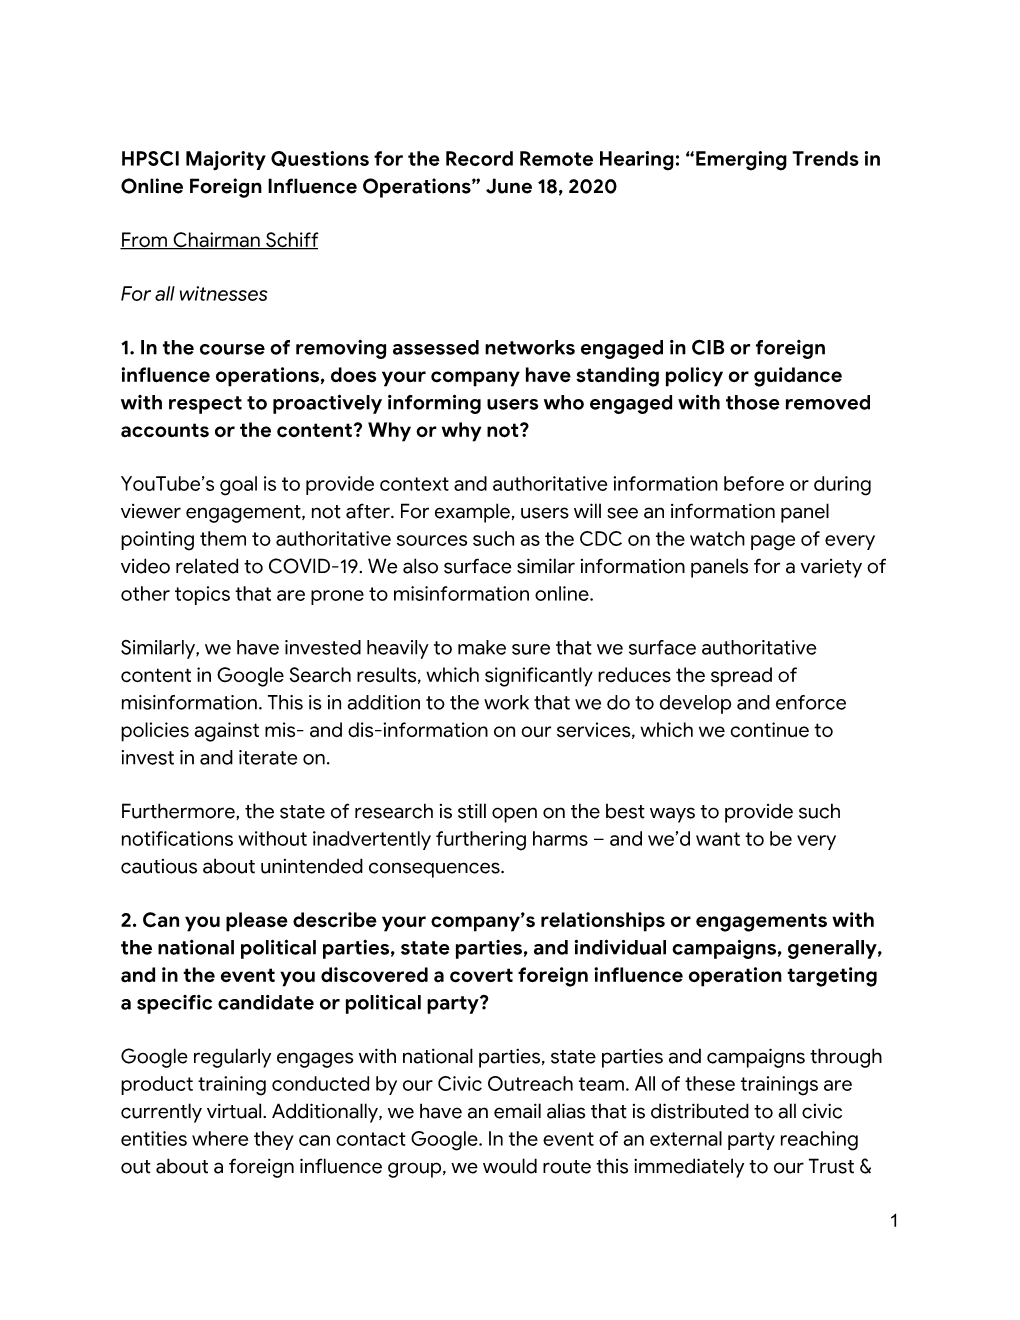 Emerging Trends in Online Foreign Influence Operations” June 18, 2020